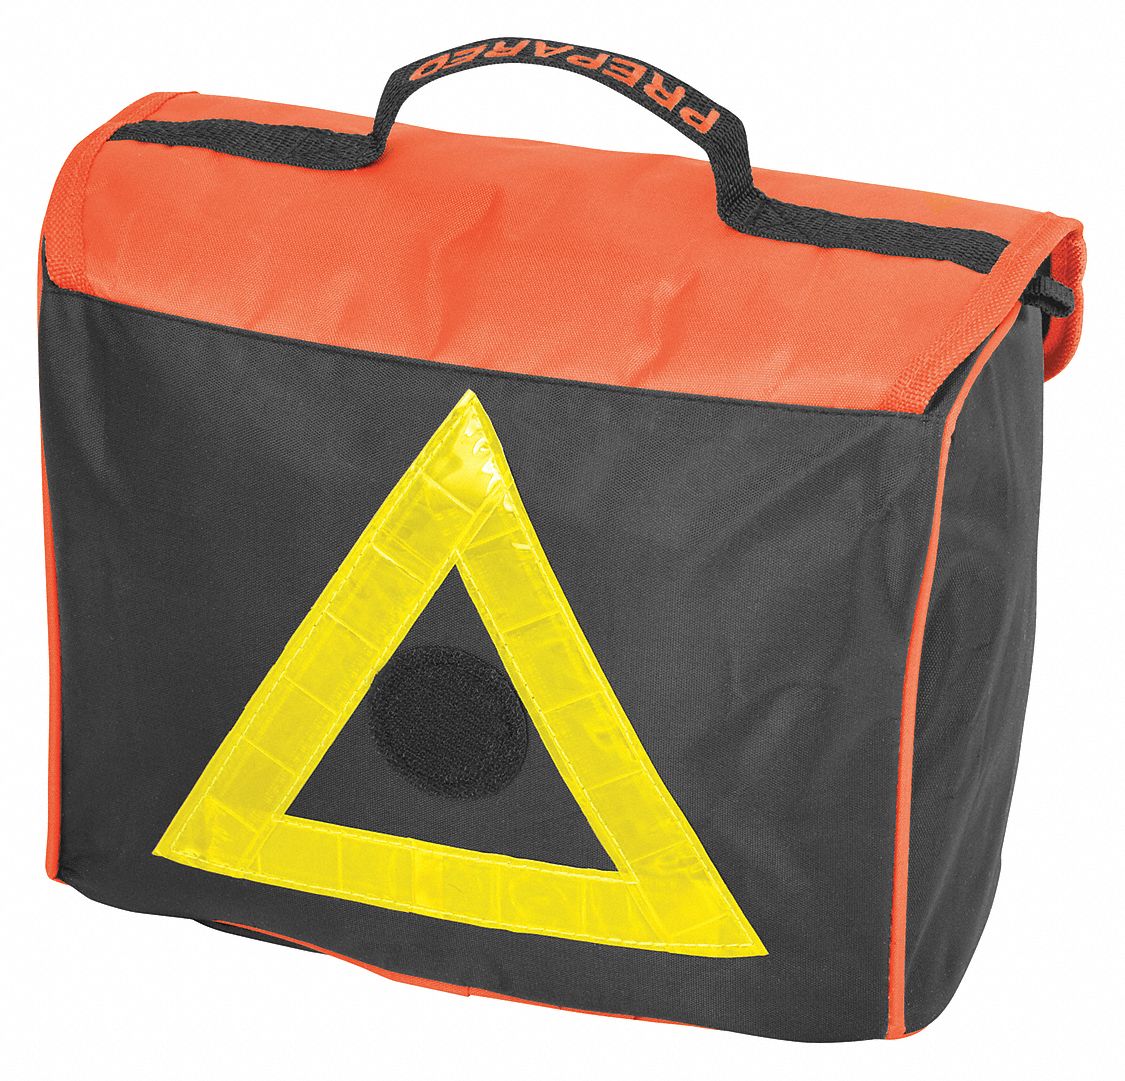 Roadside Emergency Kit: 0 Triangles, 57 Pieces, 8 in Overall Ht, 10 1/2 in Overall Wd, Bag